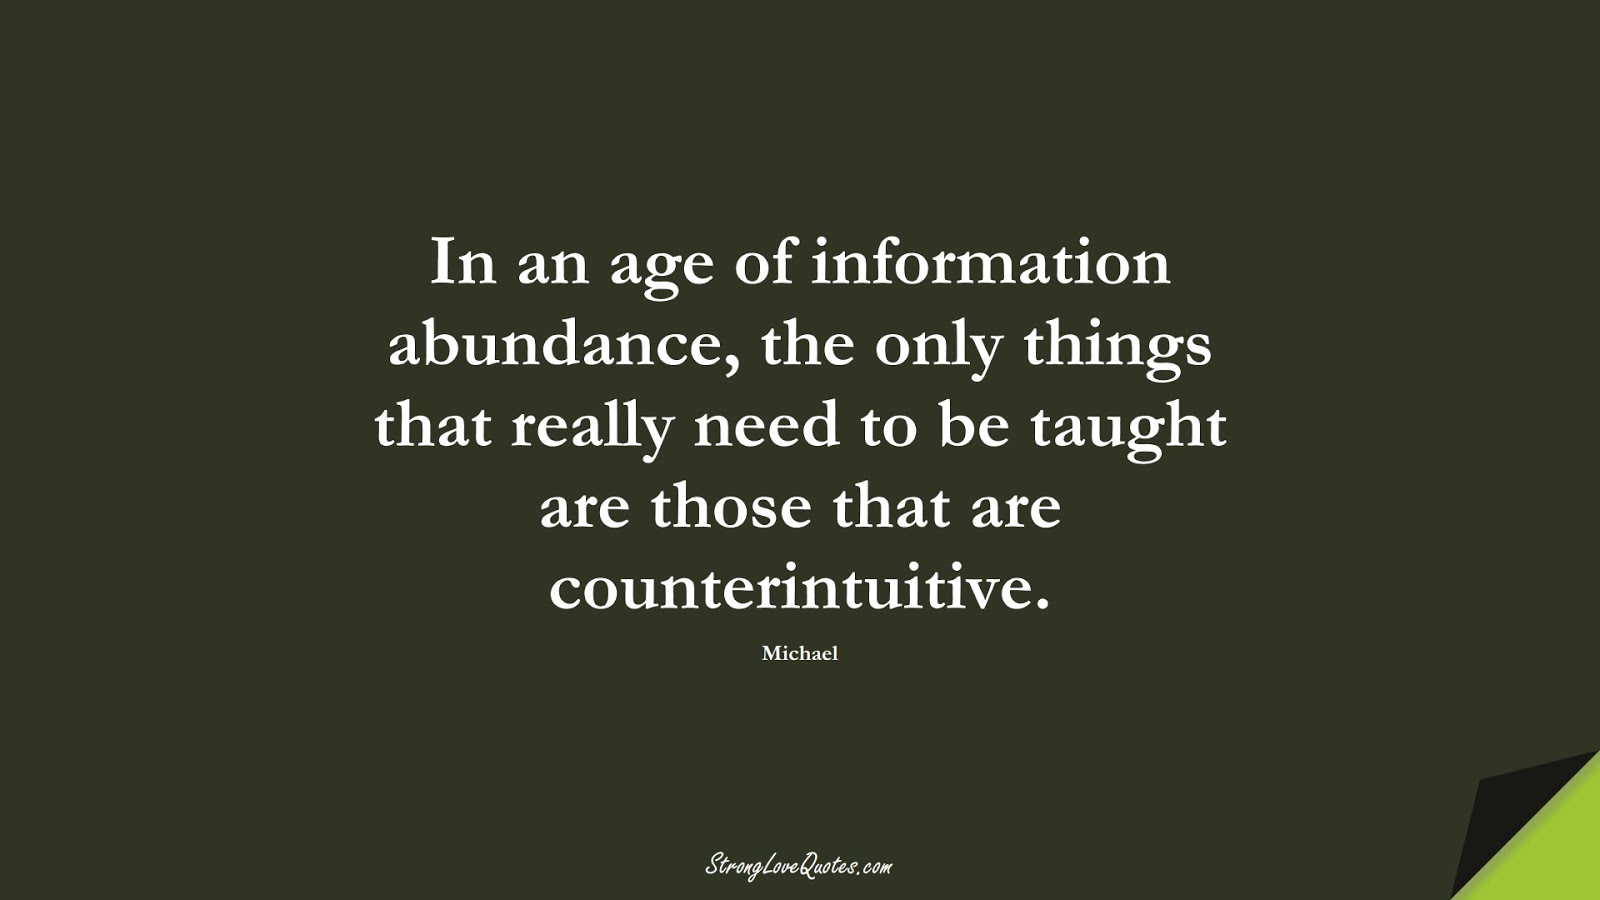 In an age of information abundance, the only things that really need to be taught are those that are counterintuitive. (Michael);  #KnowledgeQuotes